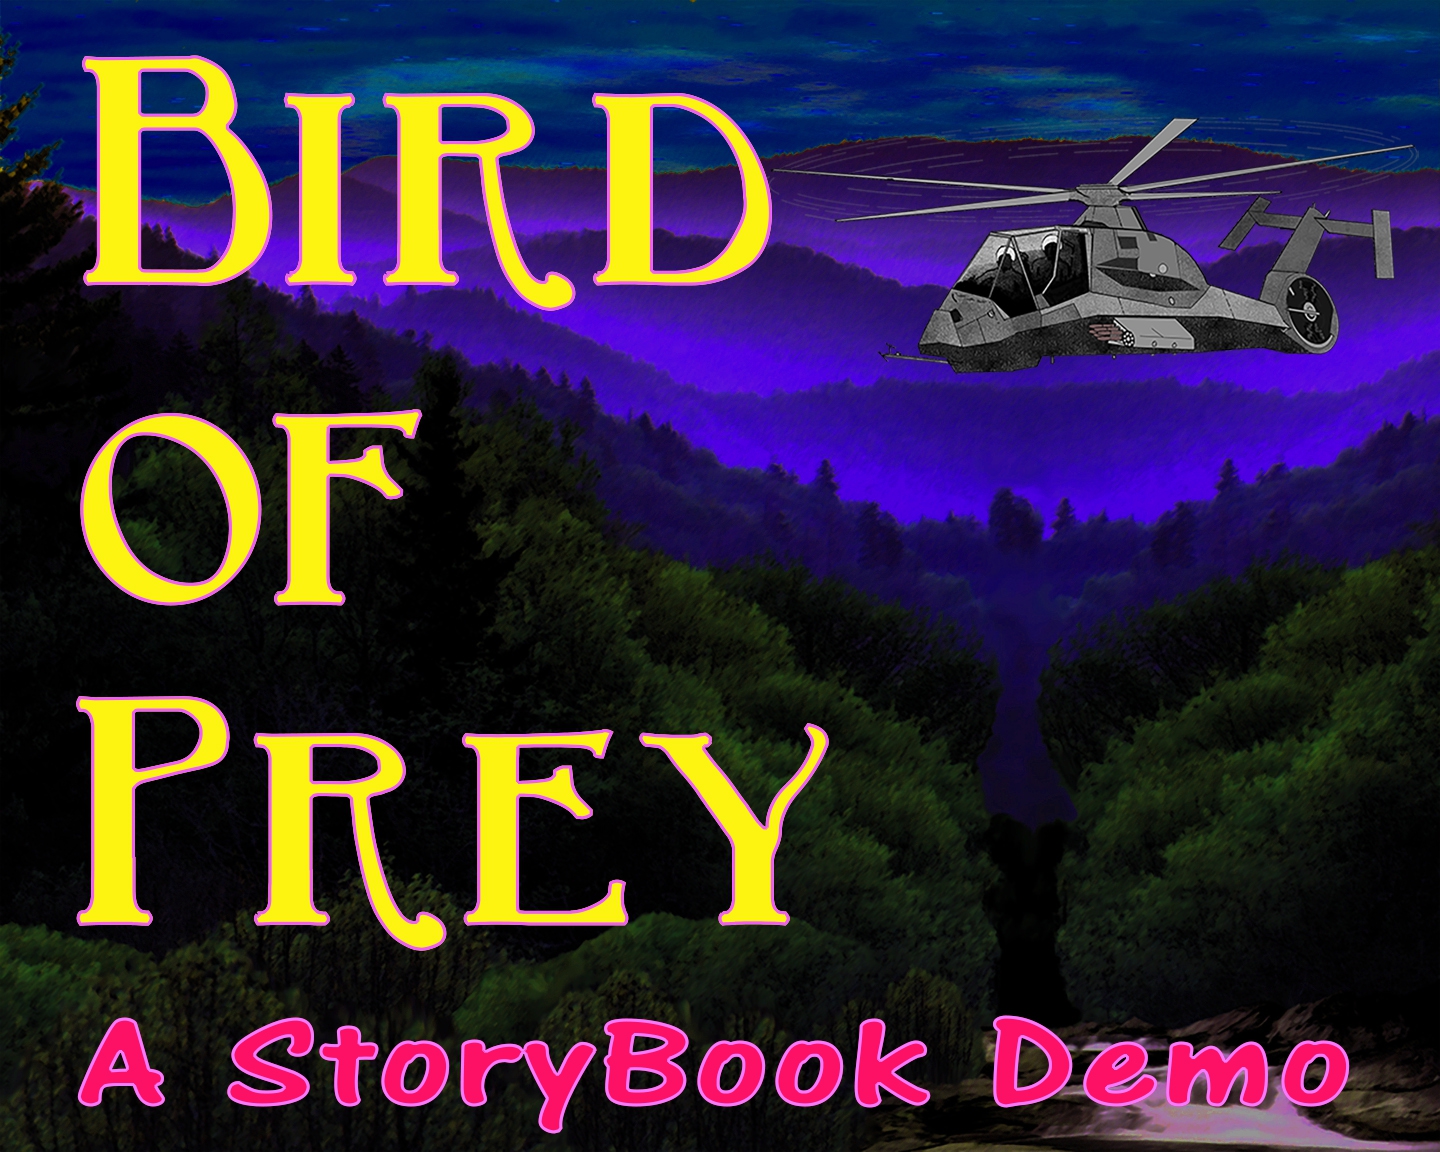 A Hornet chopper over a hilly background at night, with the comic title superimposed.